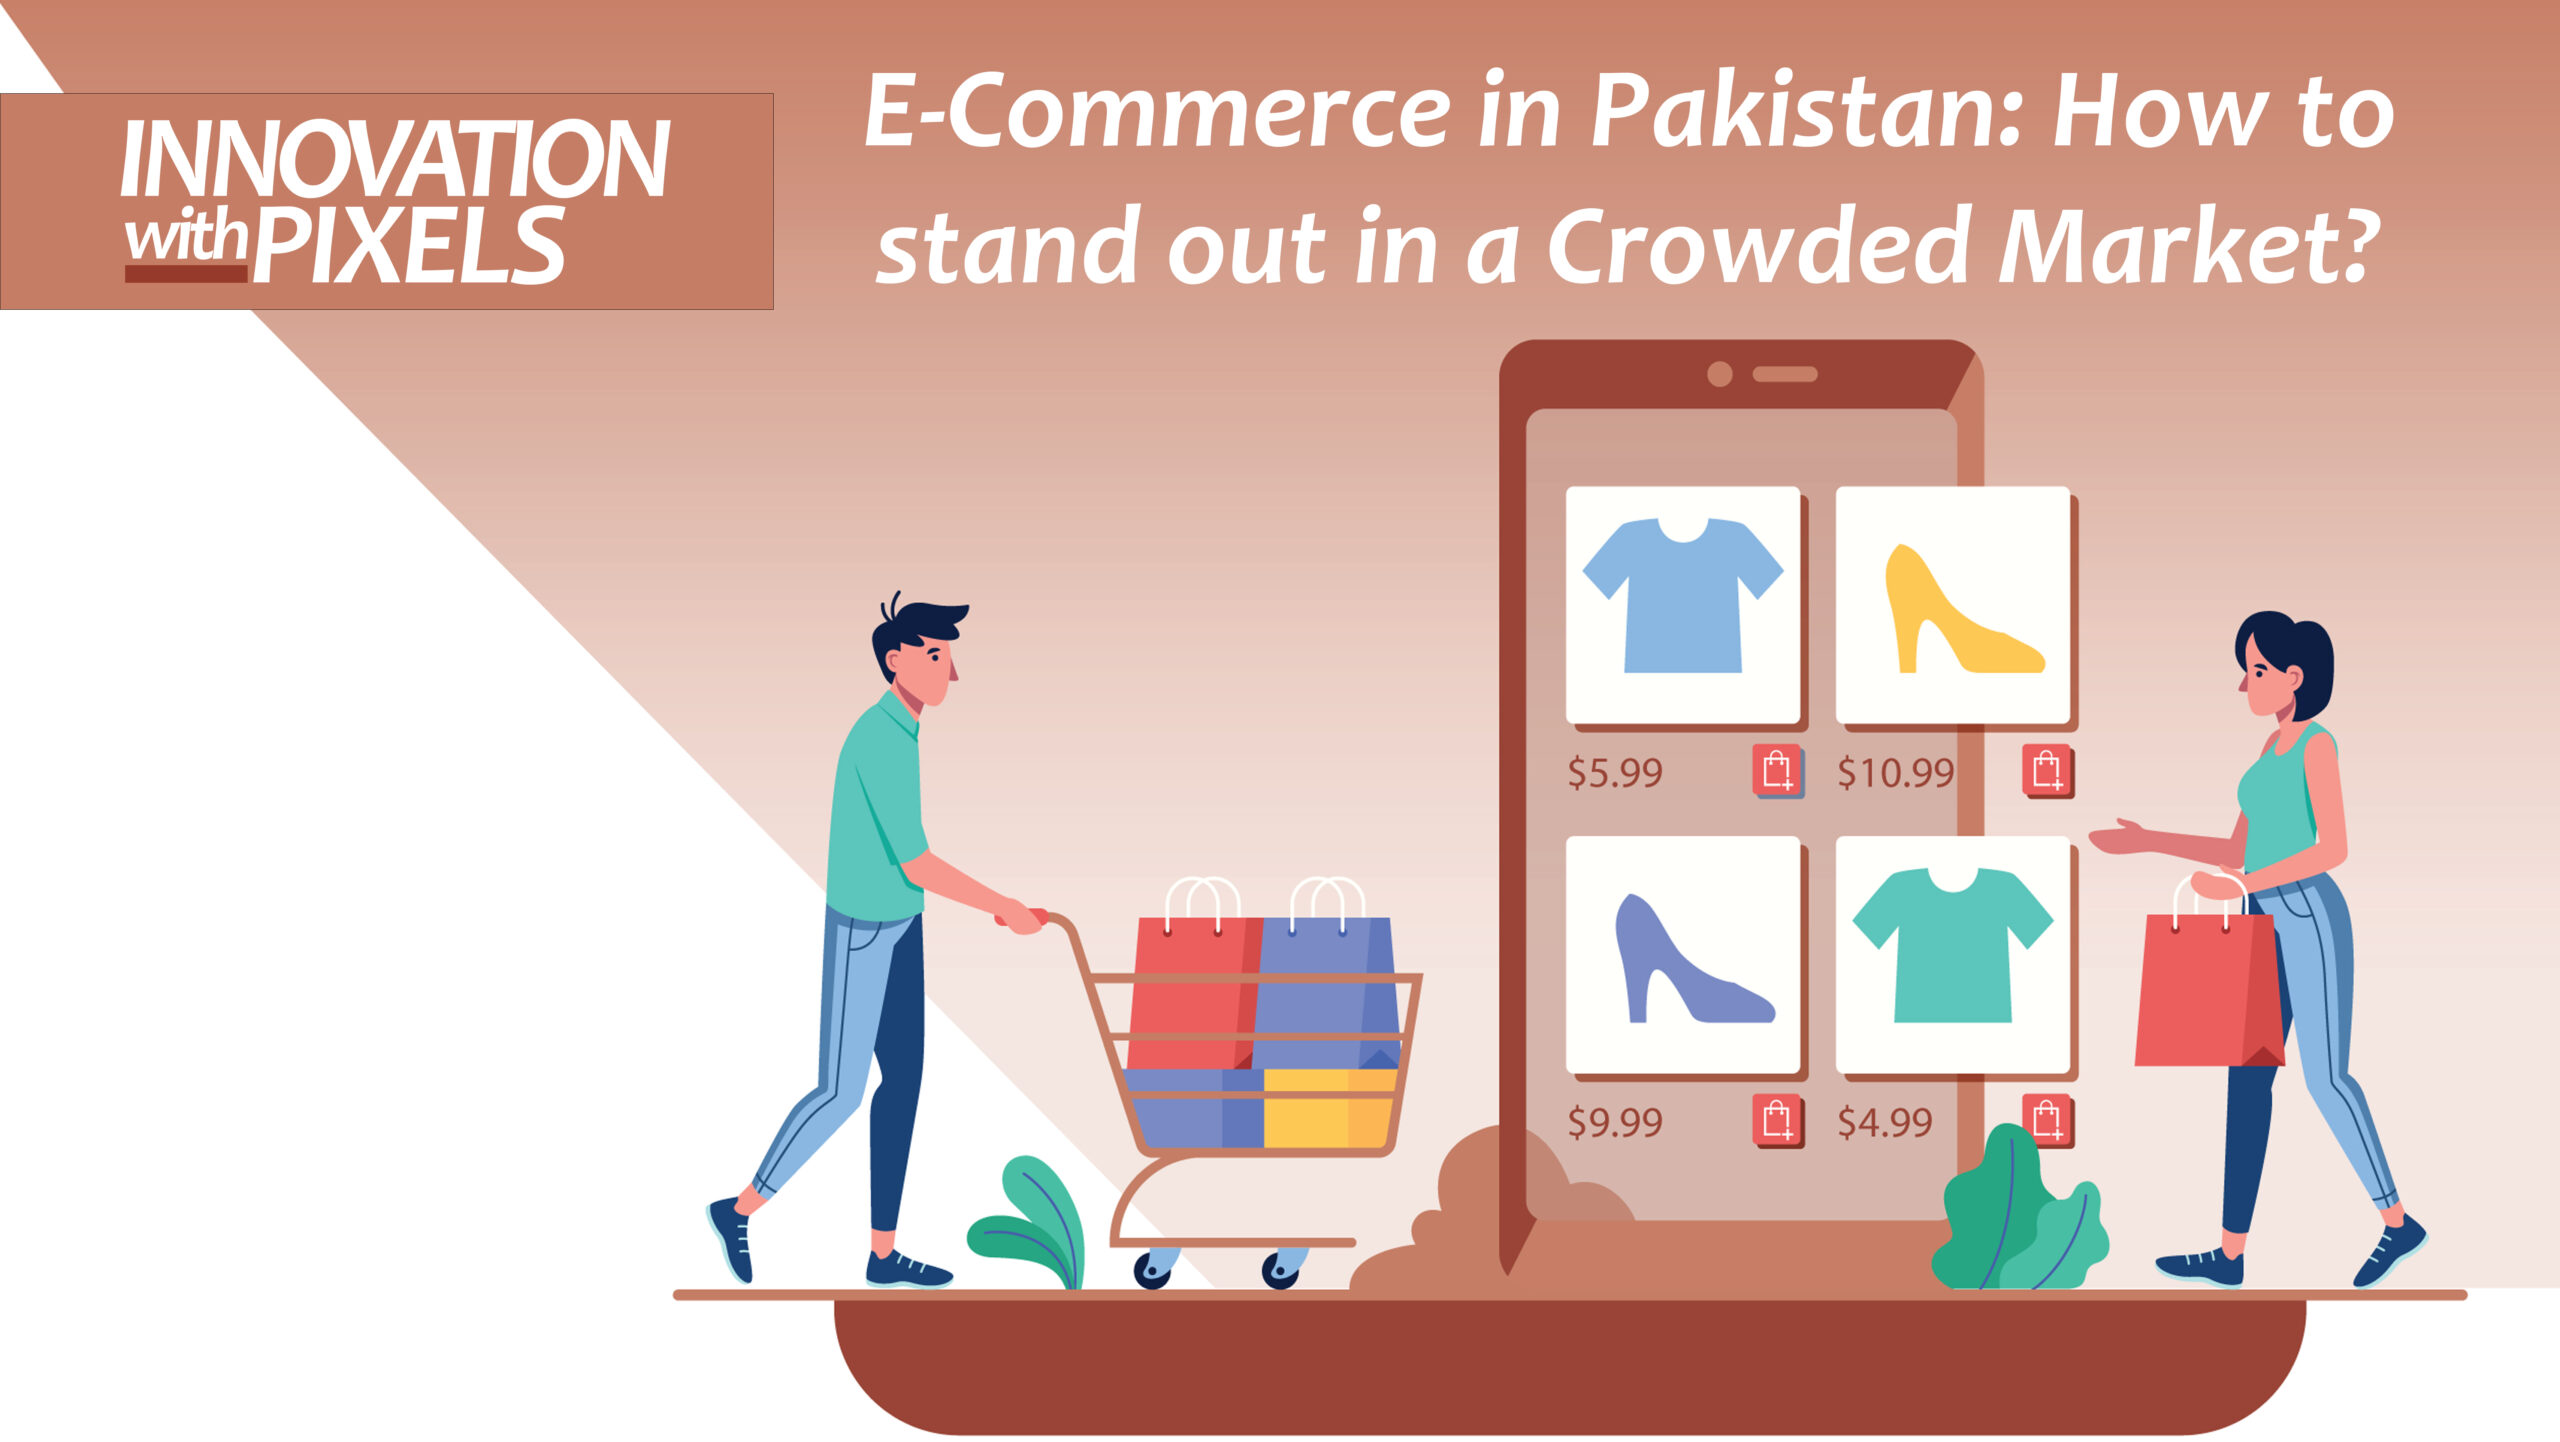 E-Commerce in Pakistan: How to stand out in a Crowded Market?